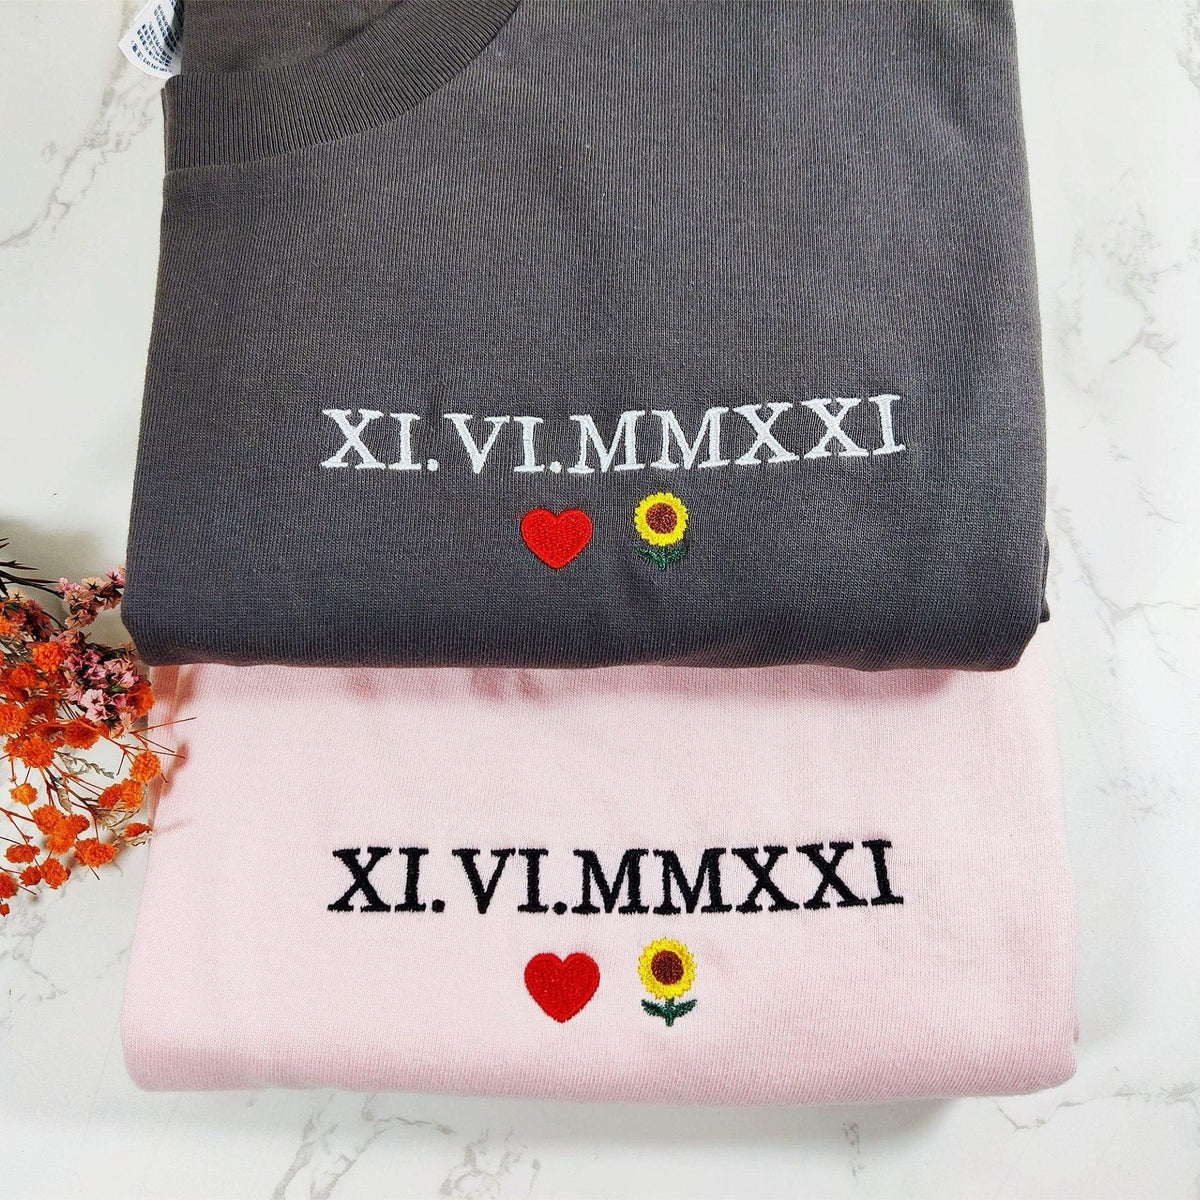 Custom Embroidered Sweatshirts For Couples, Personalized Embroidered Roman Numerals &amp; Heart Flower Anniversary Date Sweatshirt